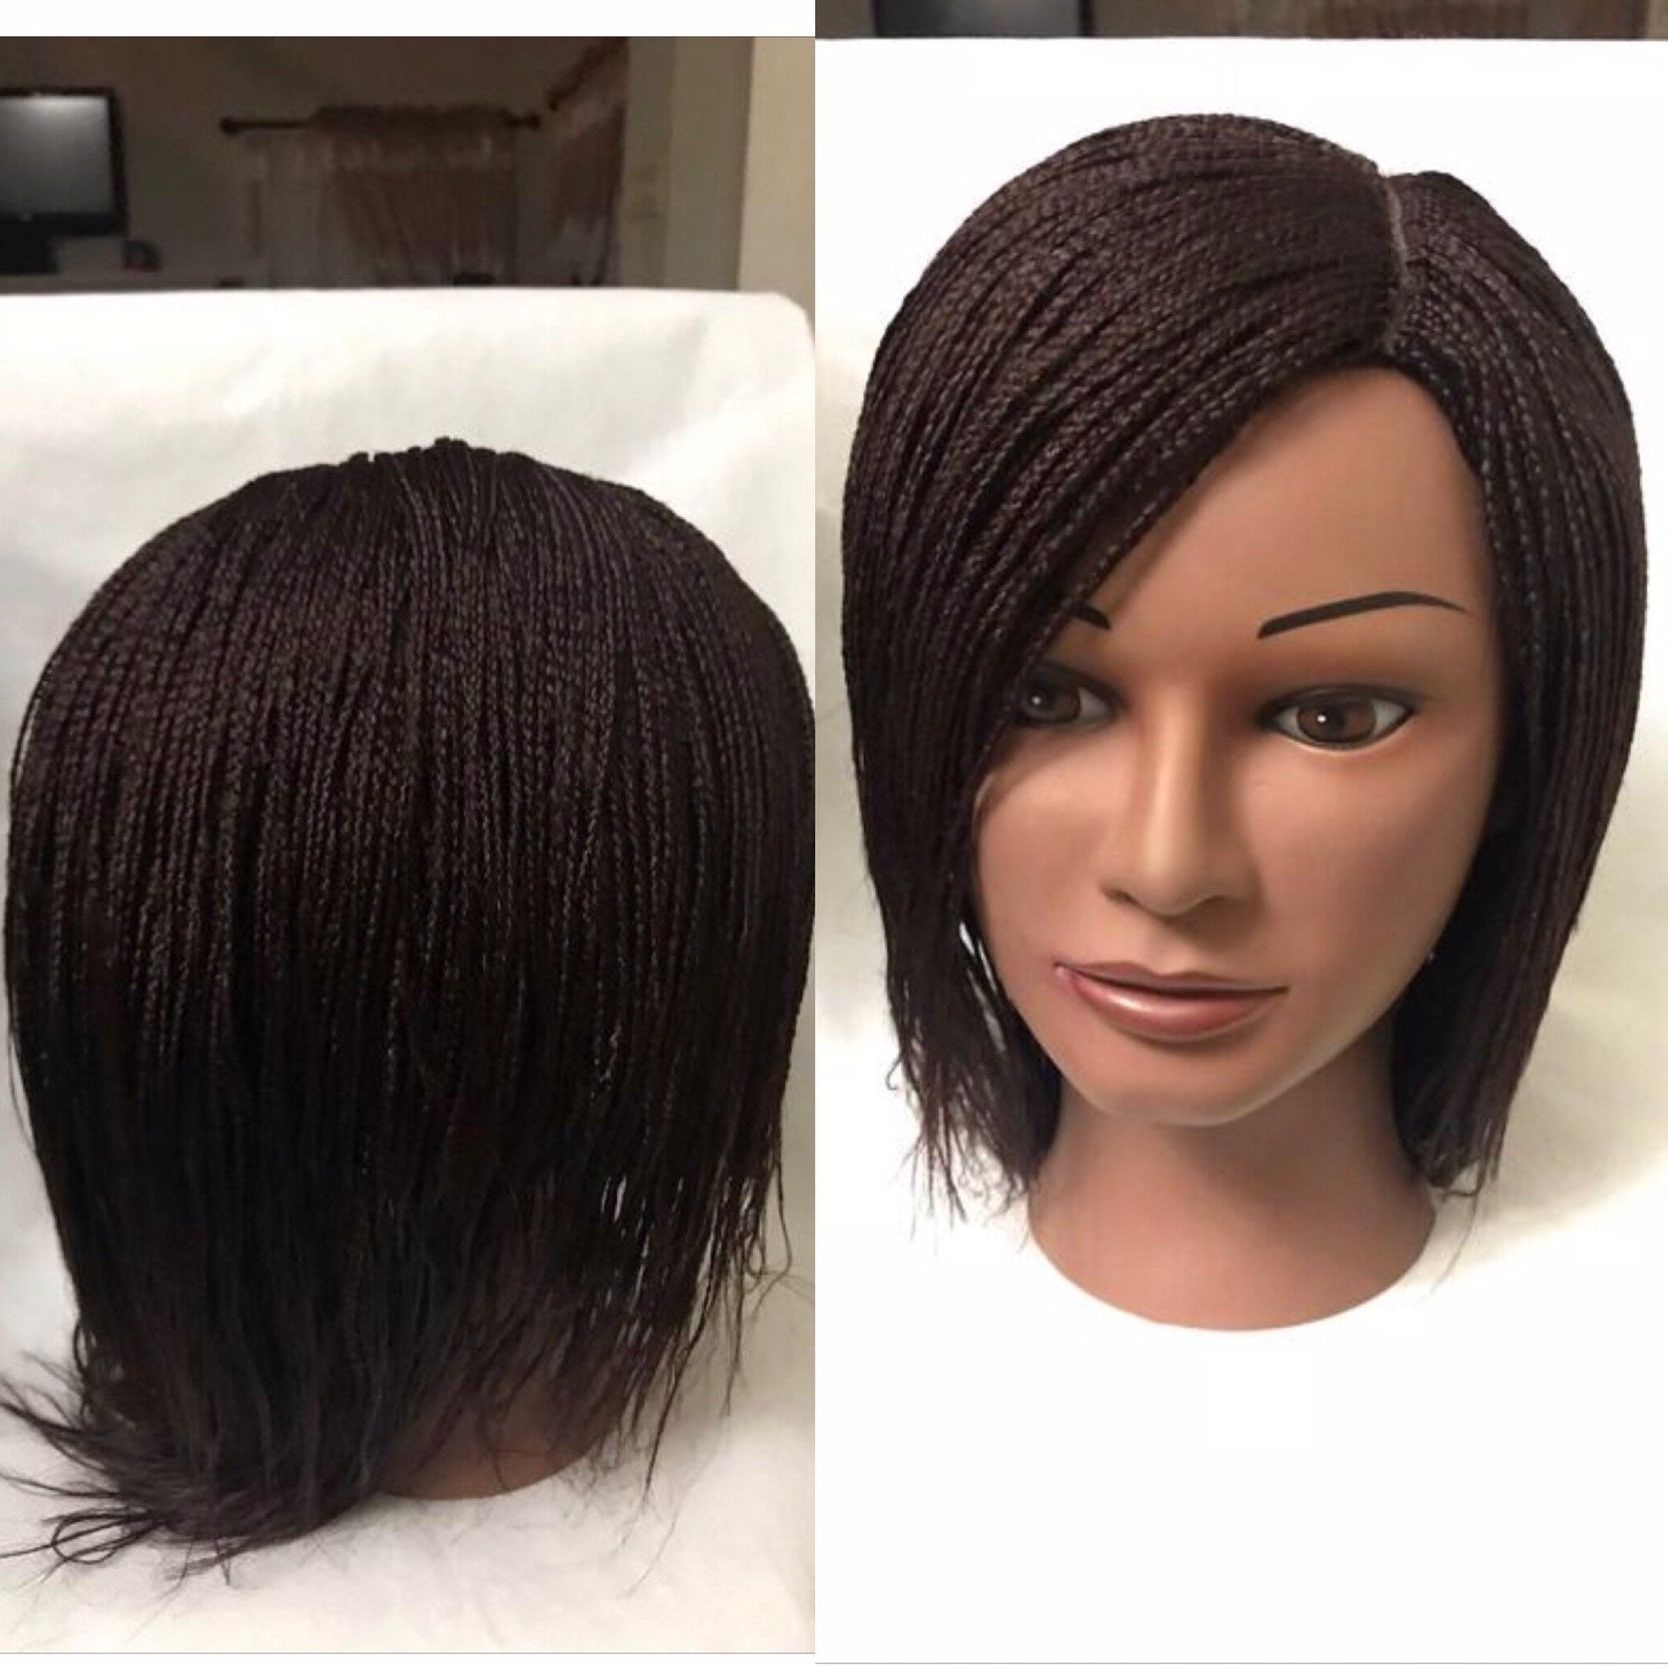 Widely Used Light Brown Braid Hairstyles Pertaining To Braided Wig/ Box Wig 10inches Wig.color On Display Is Color 30( Dark  Brown)this Is A Short,light Weight,natural Looking Braided Wig. (Gallery 19 of 20)